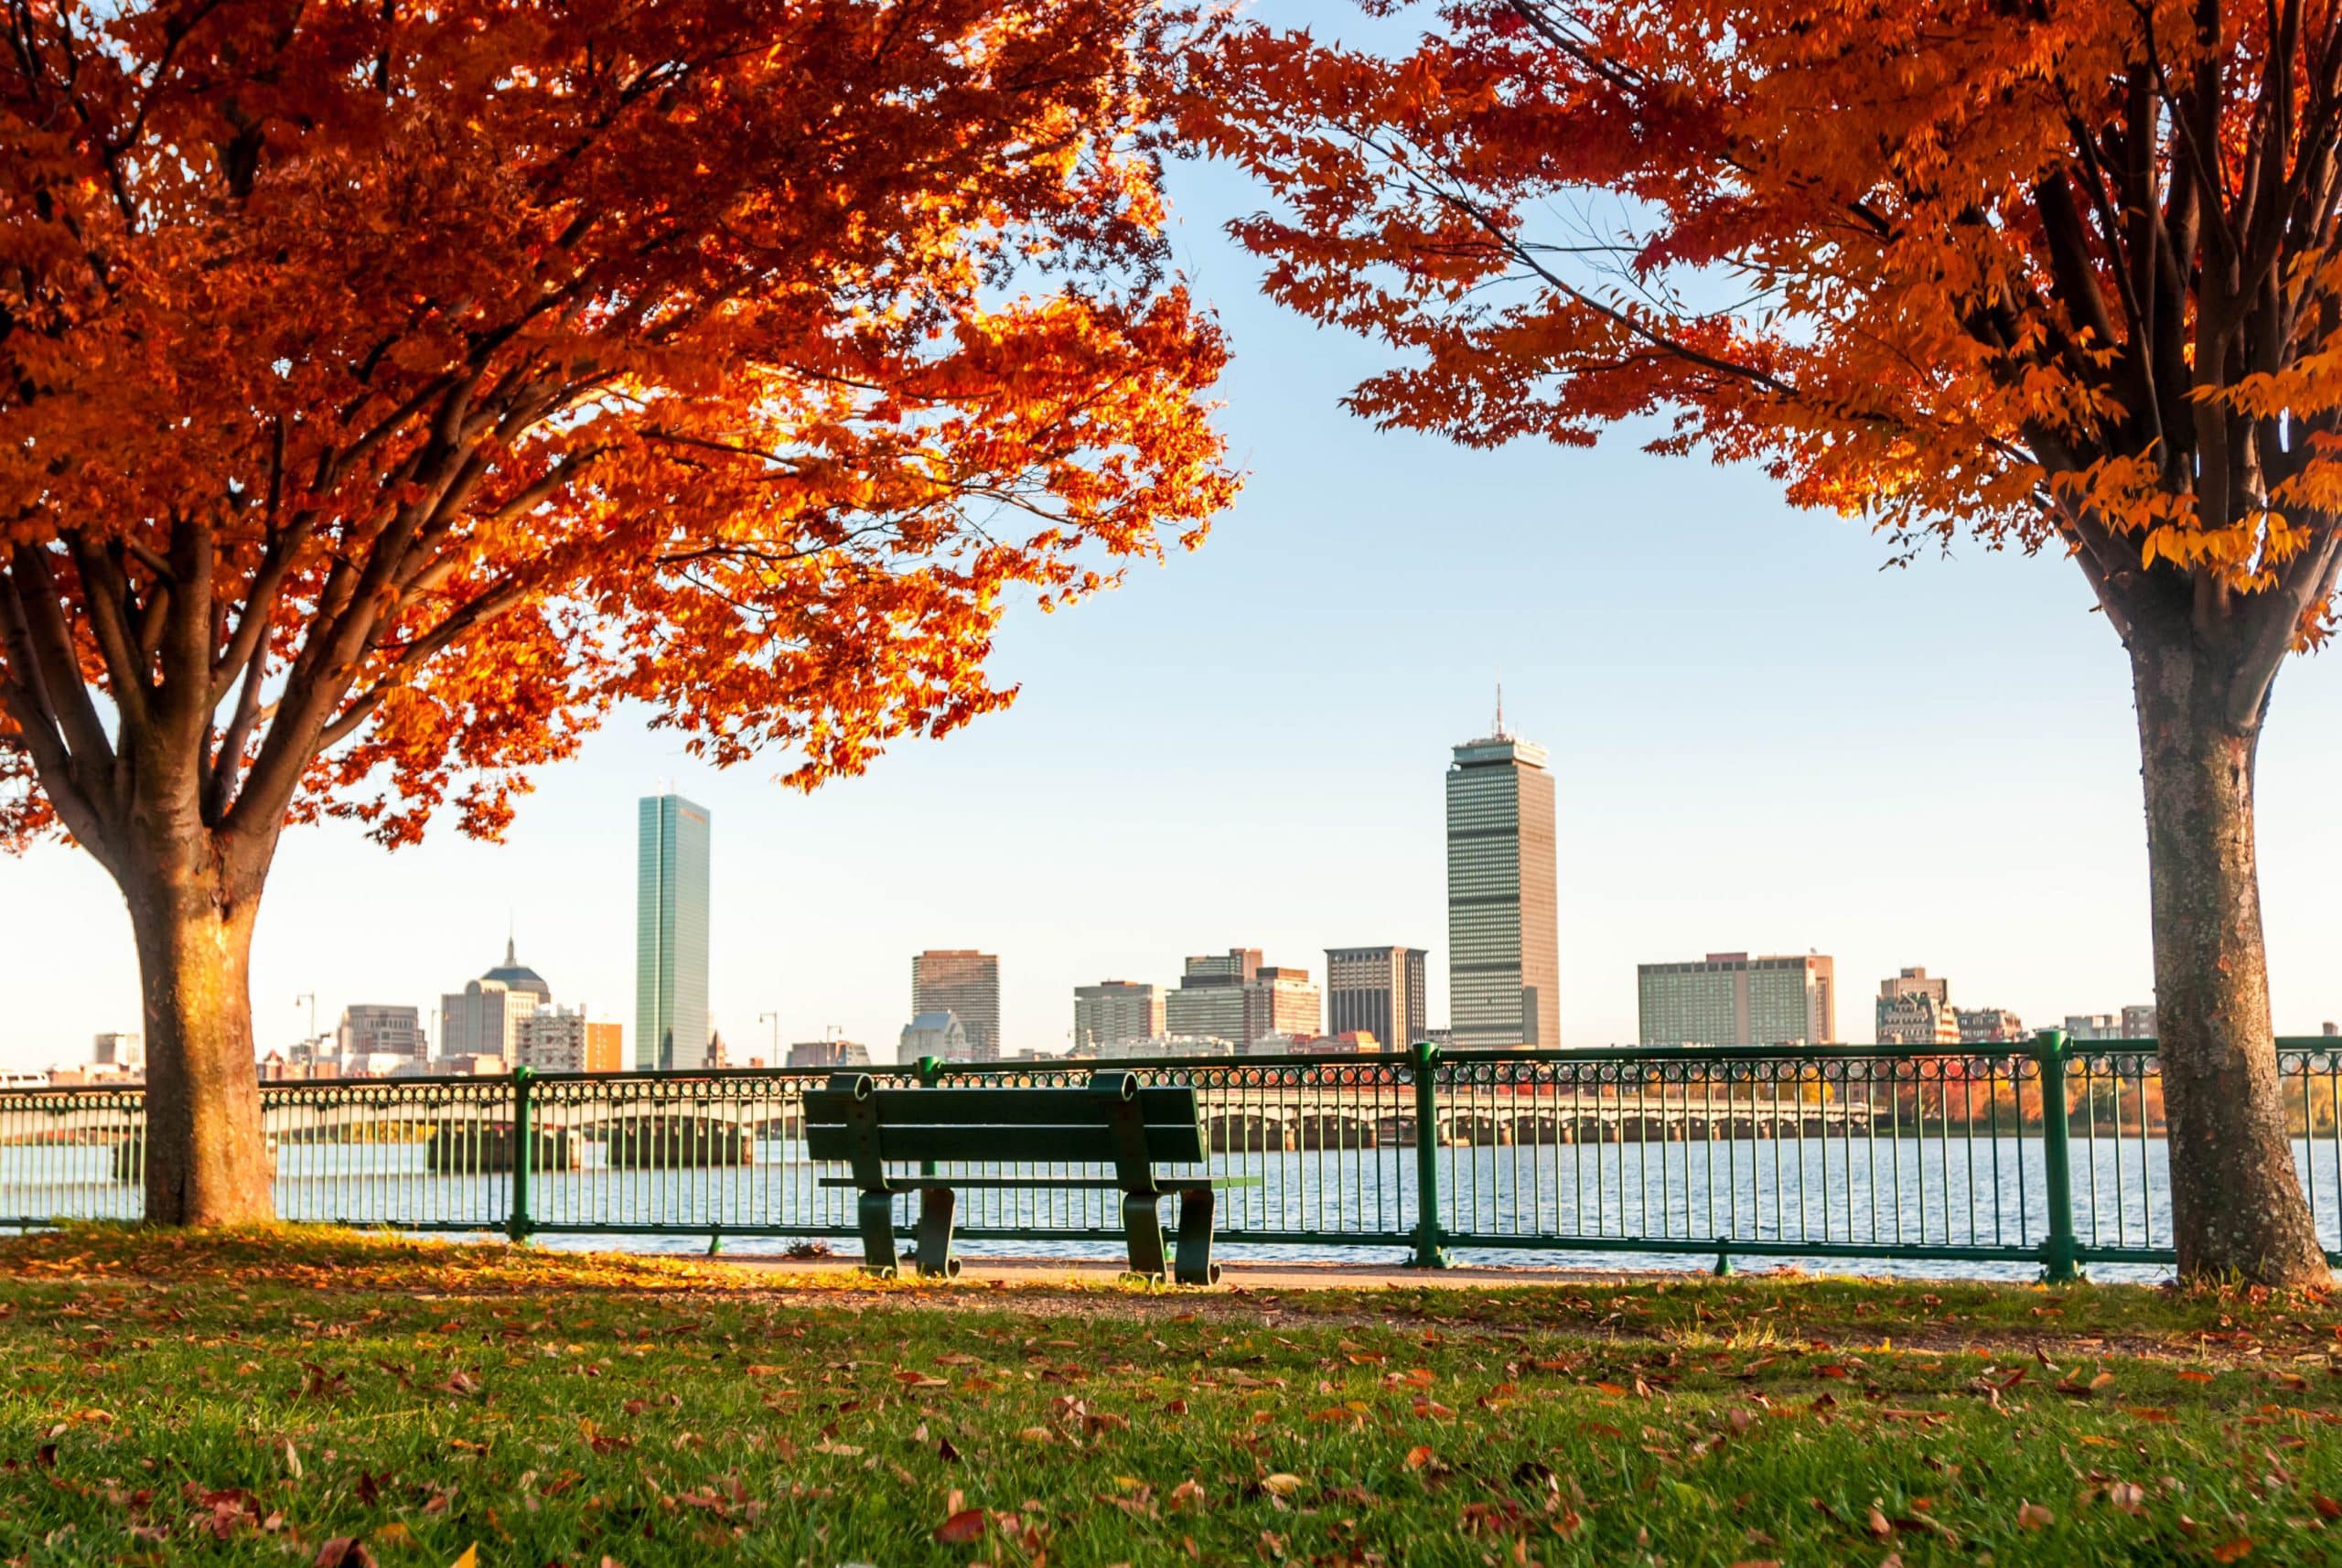 Boston,Skyline,In,Autumn,Viewed,From,Across,The,River